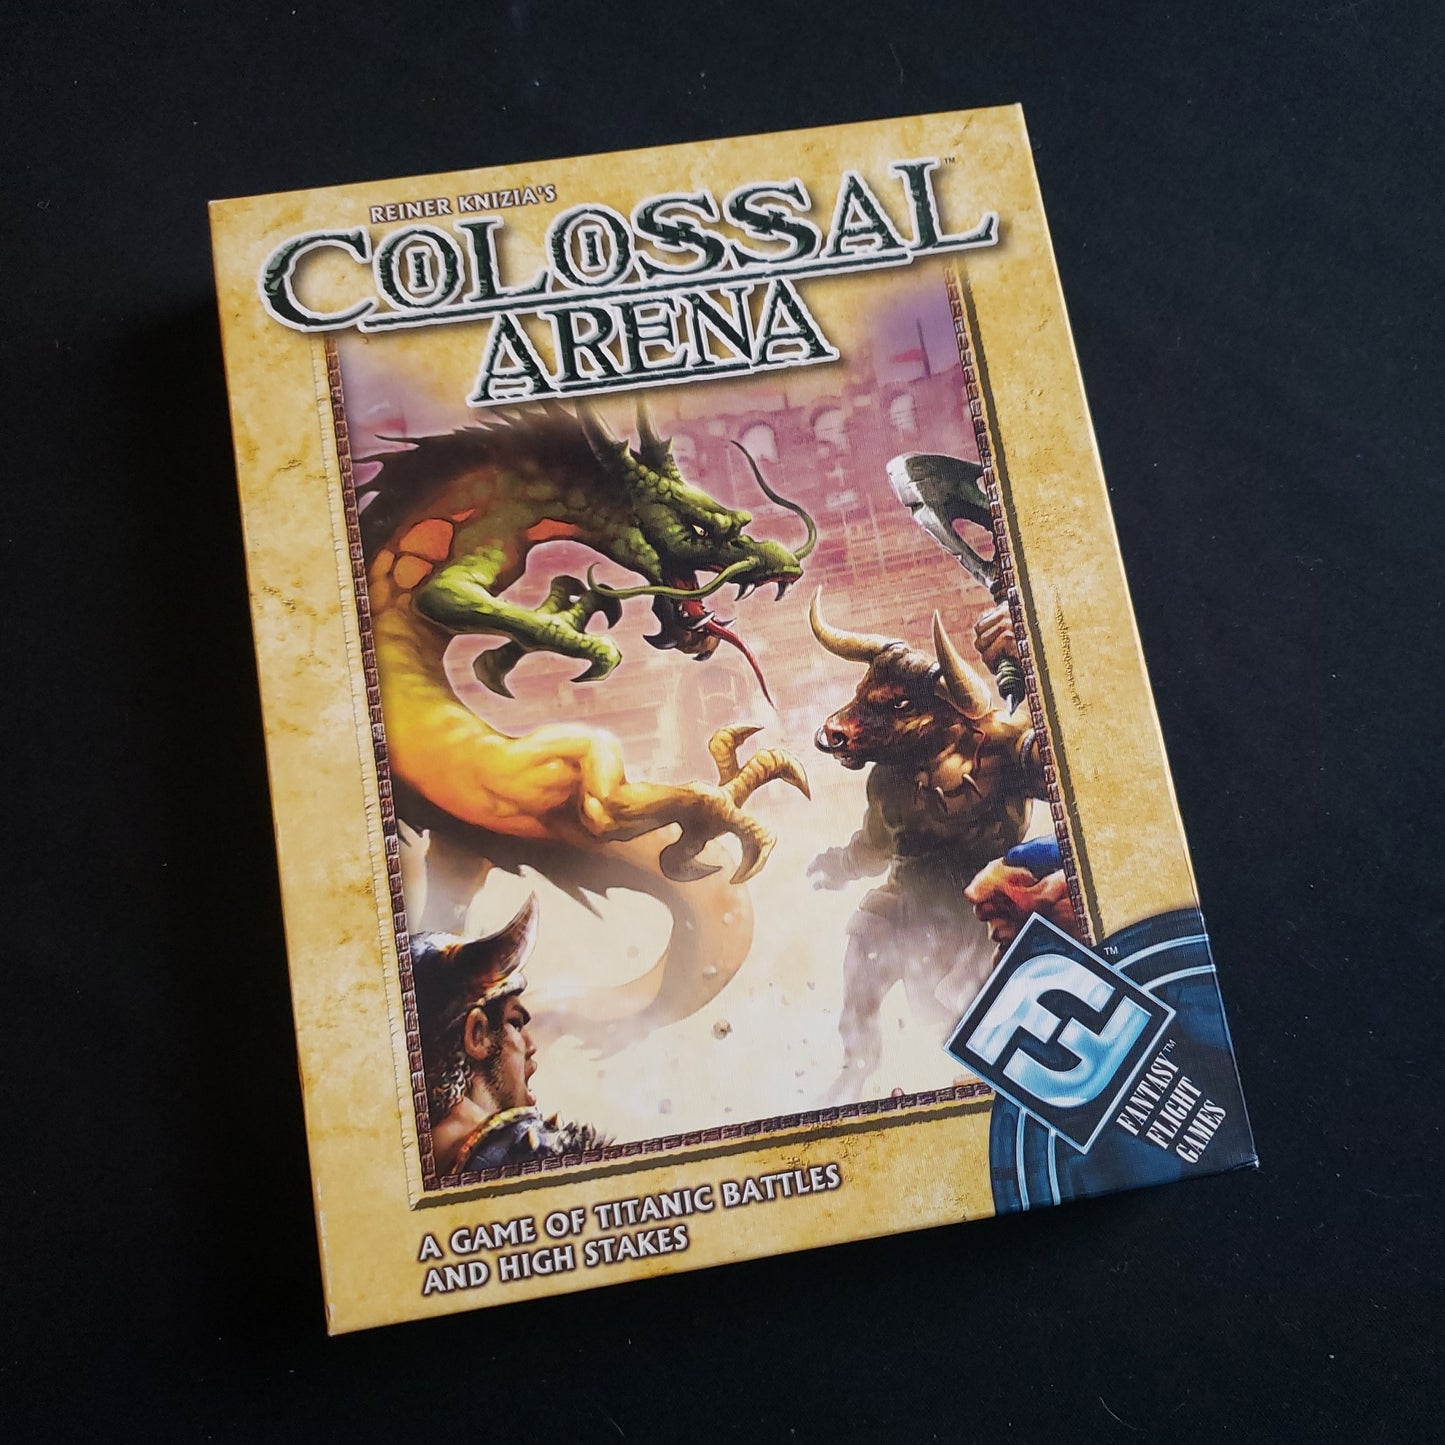 Image shows the front cover of the box of the Colossal Arena card game